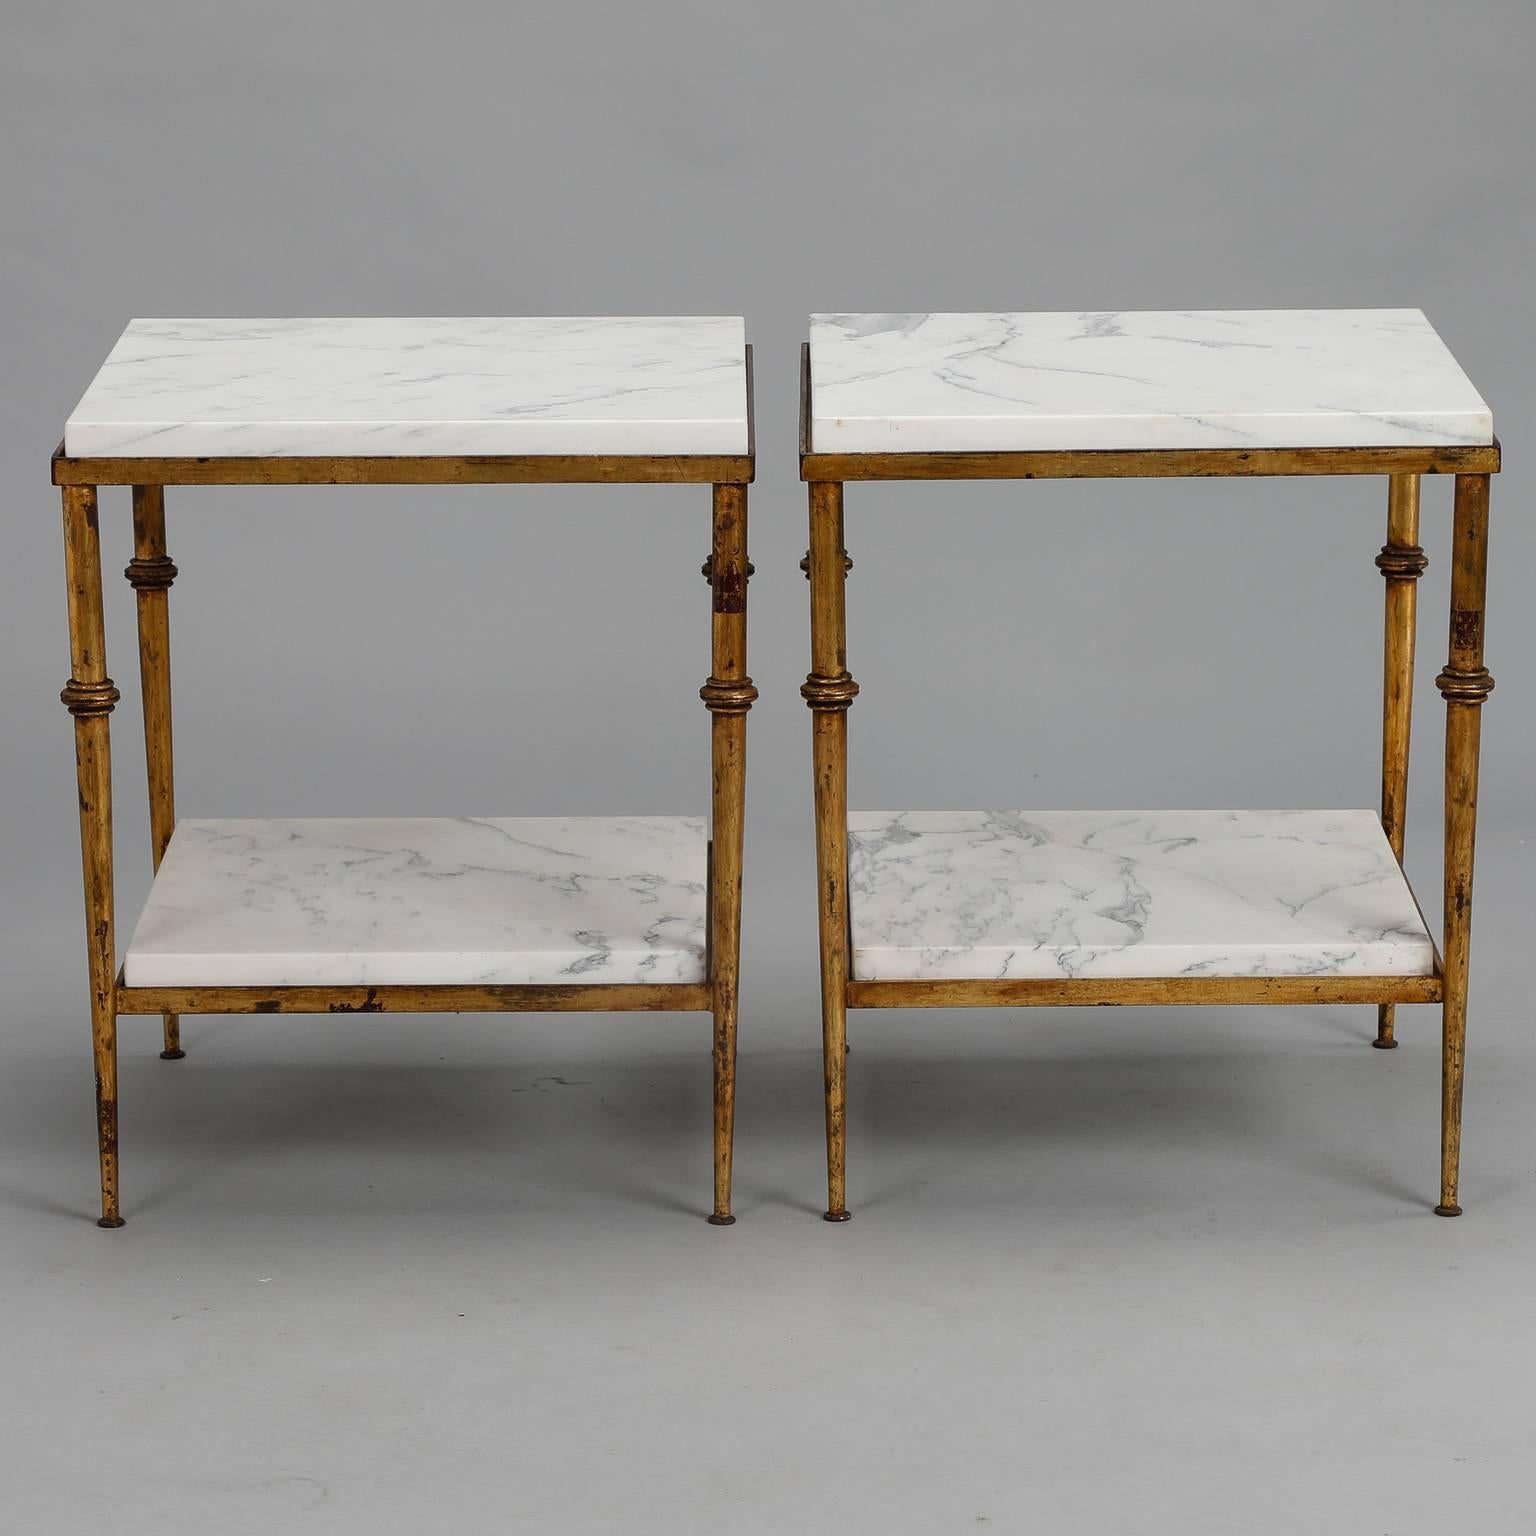 Pair of two-tier Spanish side tables feature tapered gilt metal frames marble table tops in white with gray veining, circa 1970s. Excellent vintage condition. Sold and priced as a pair.